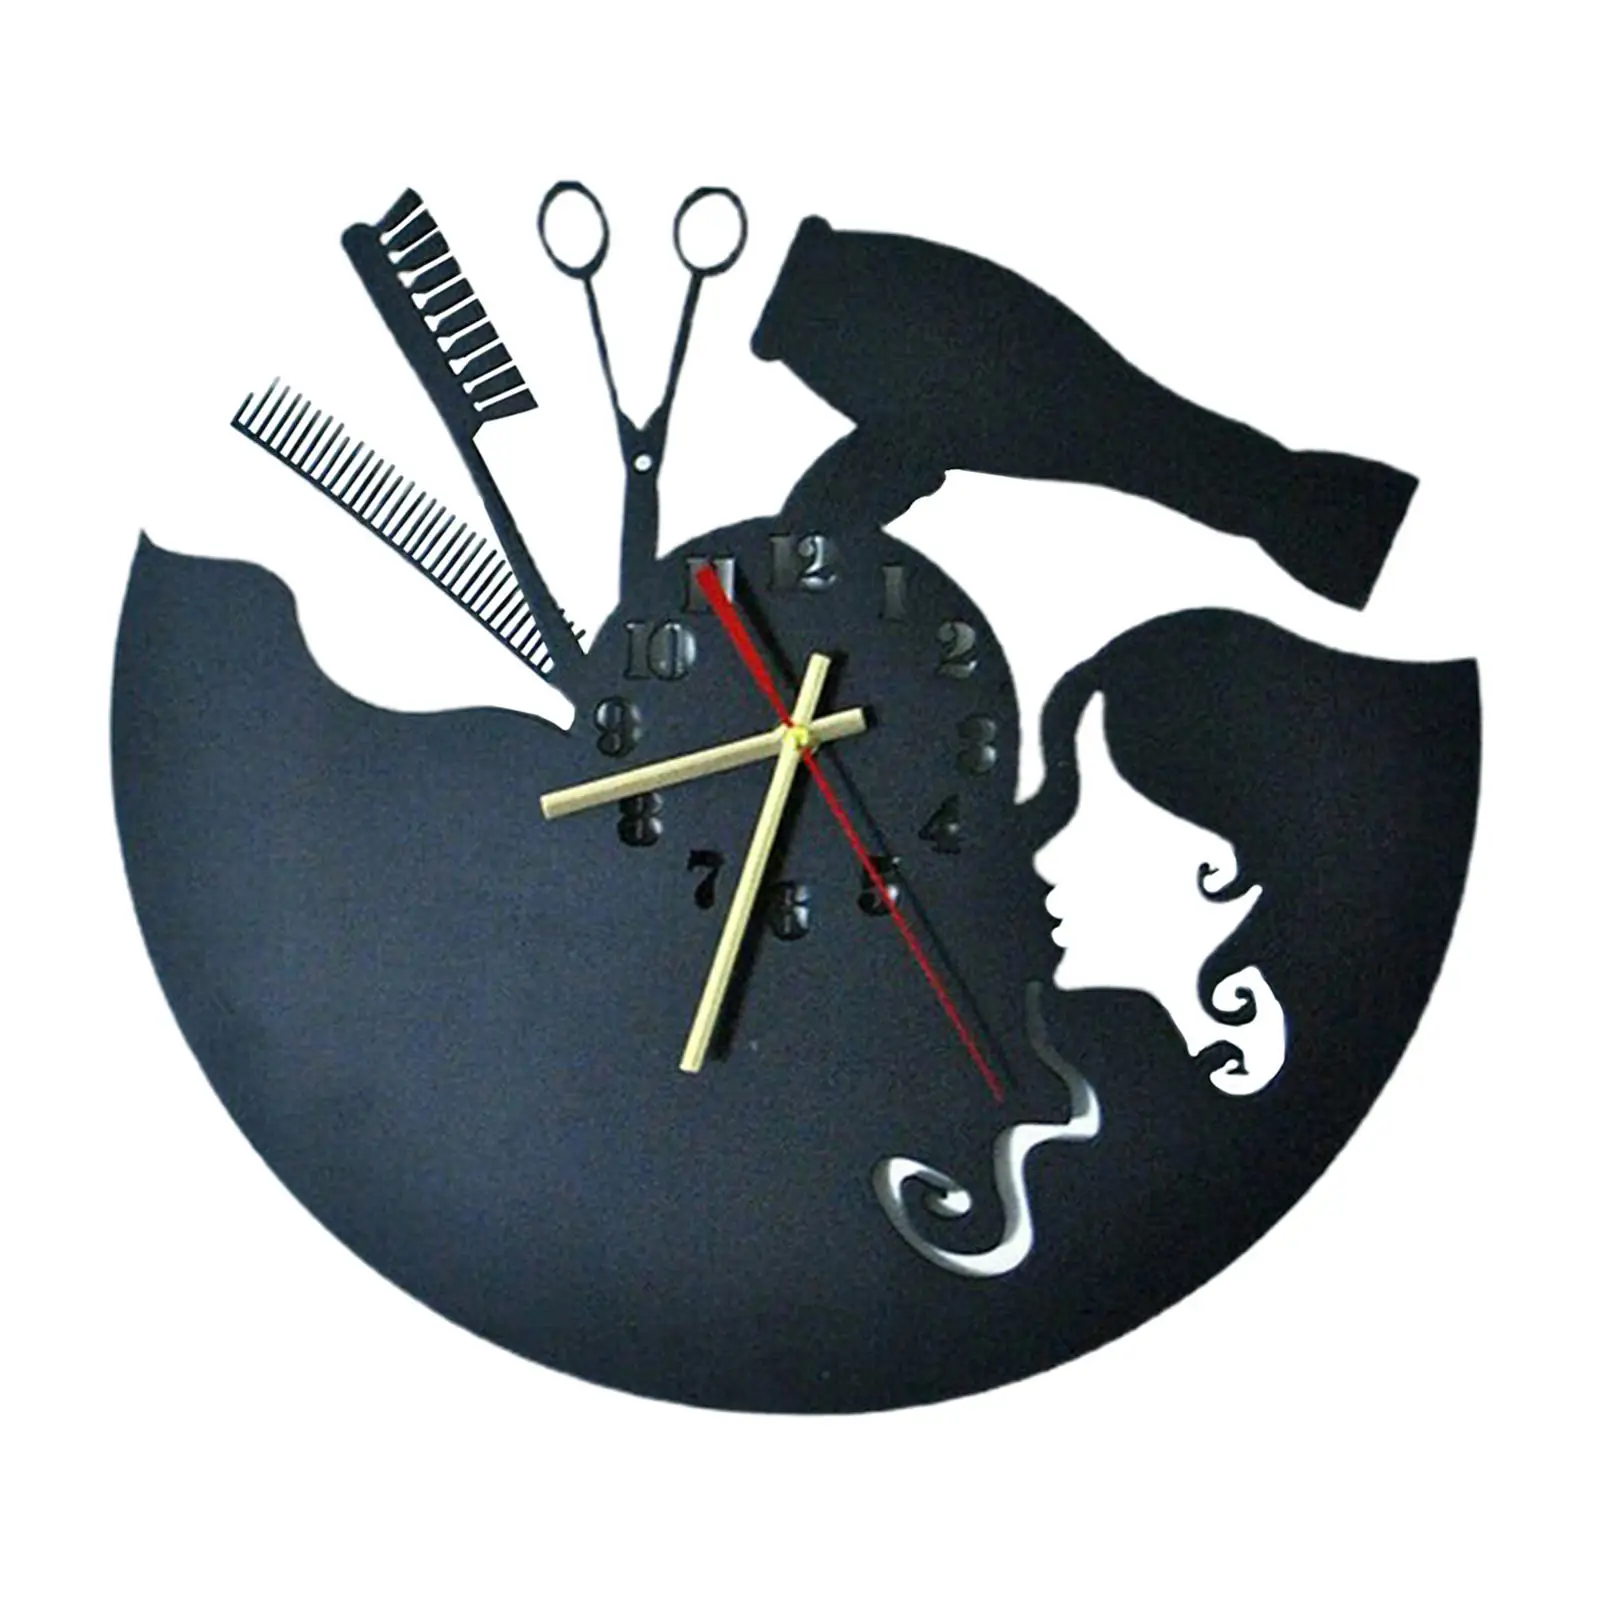 Hairdresser Wall Clock Wood Battery Operated Retro for Art Decorations Classroom Home Office